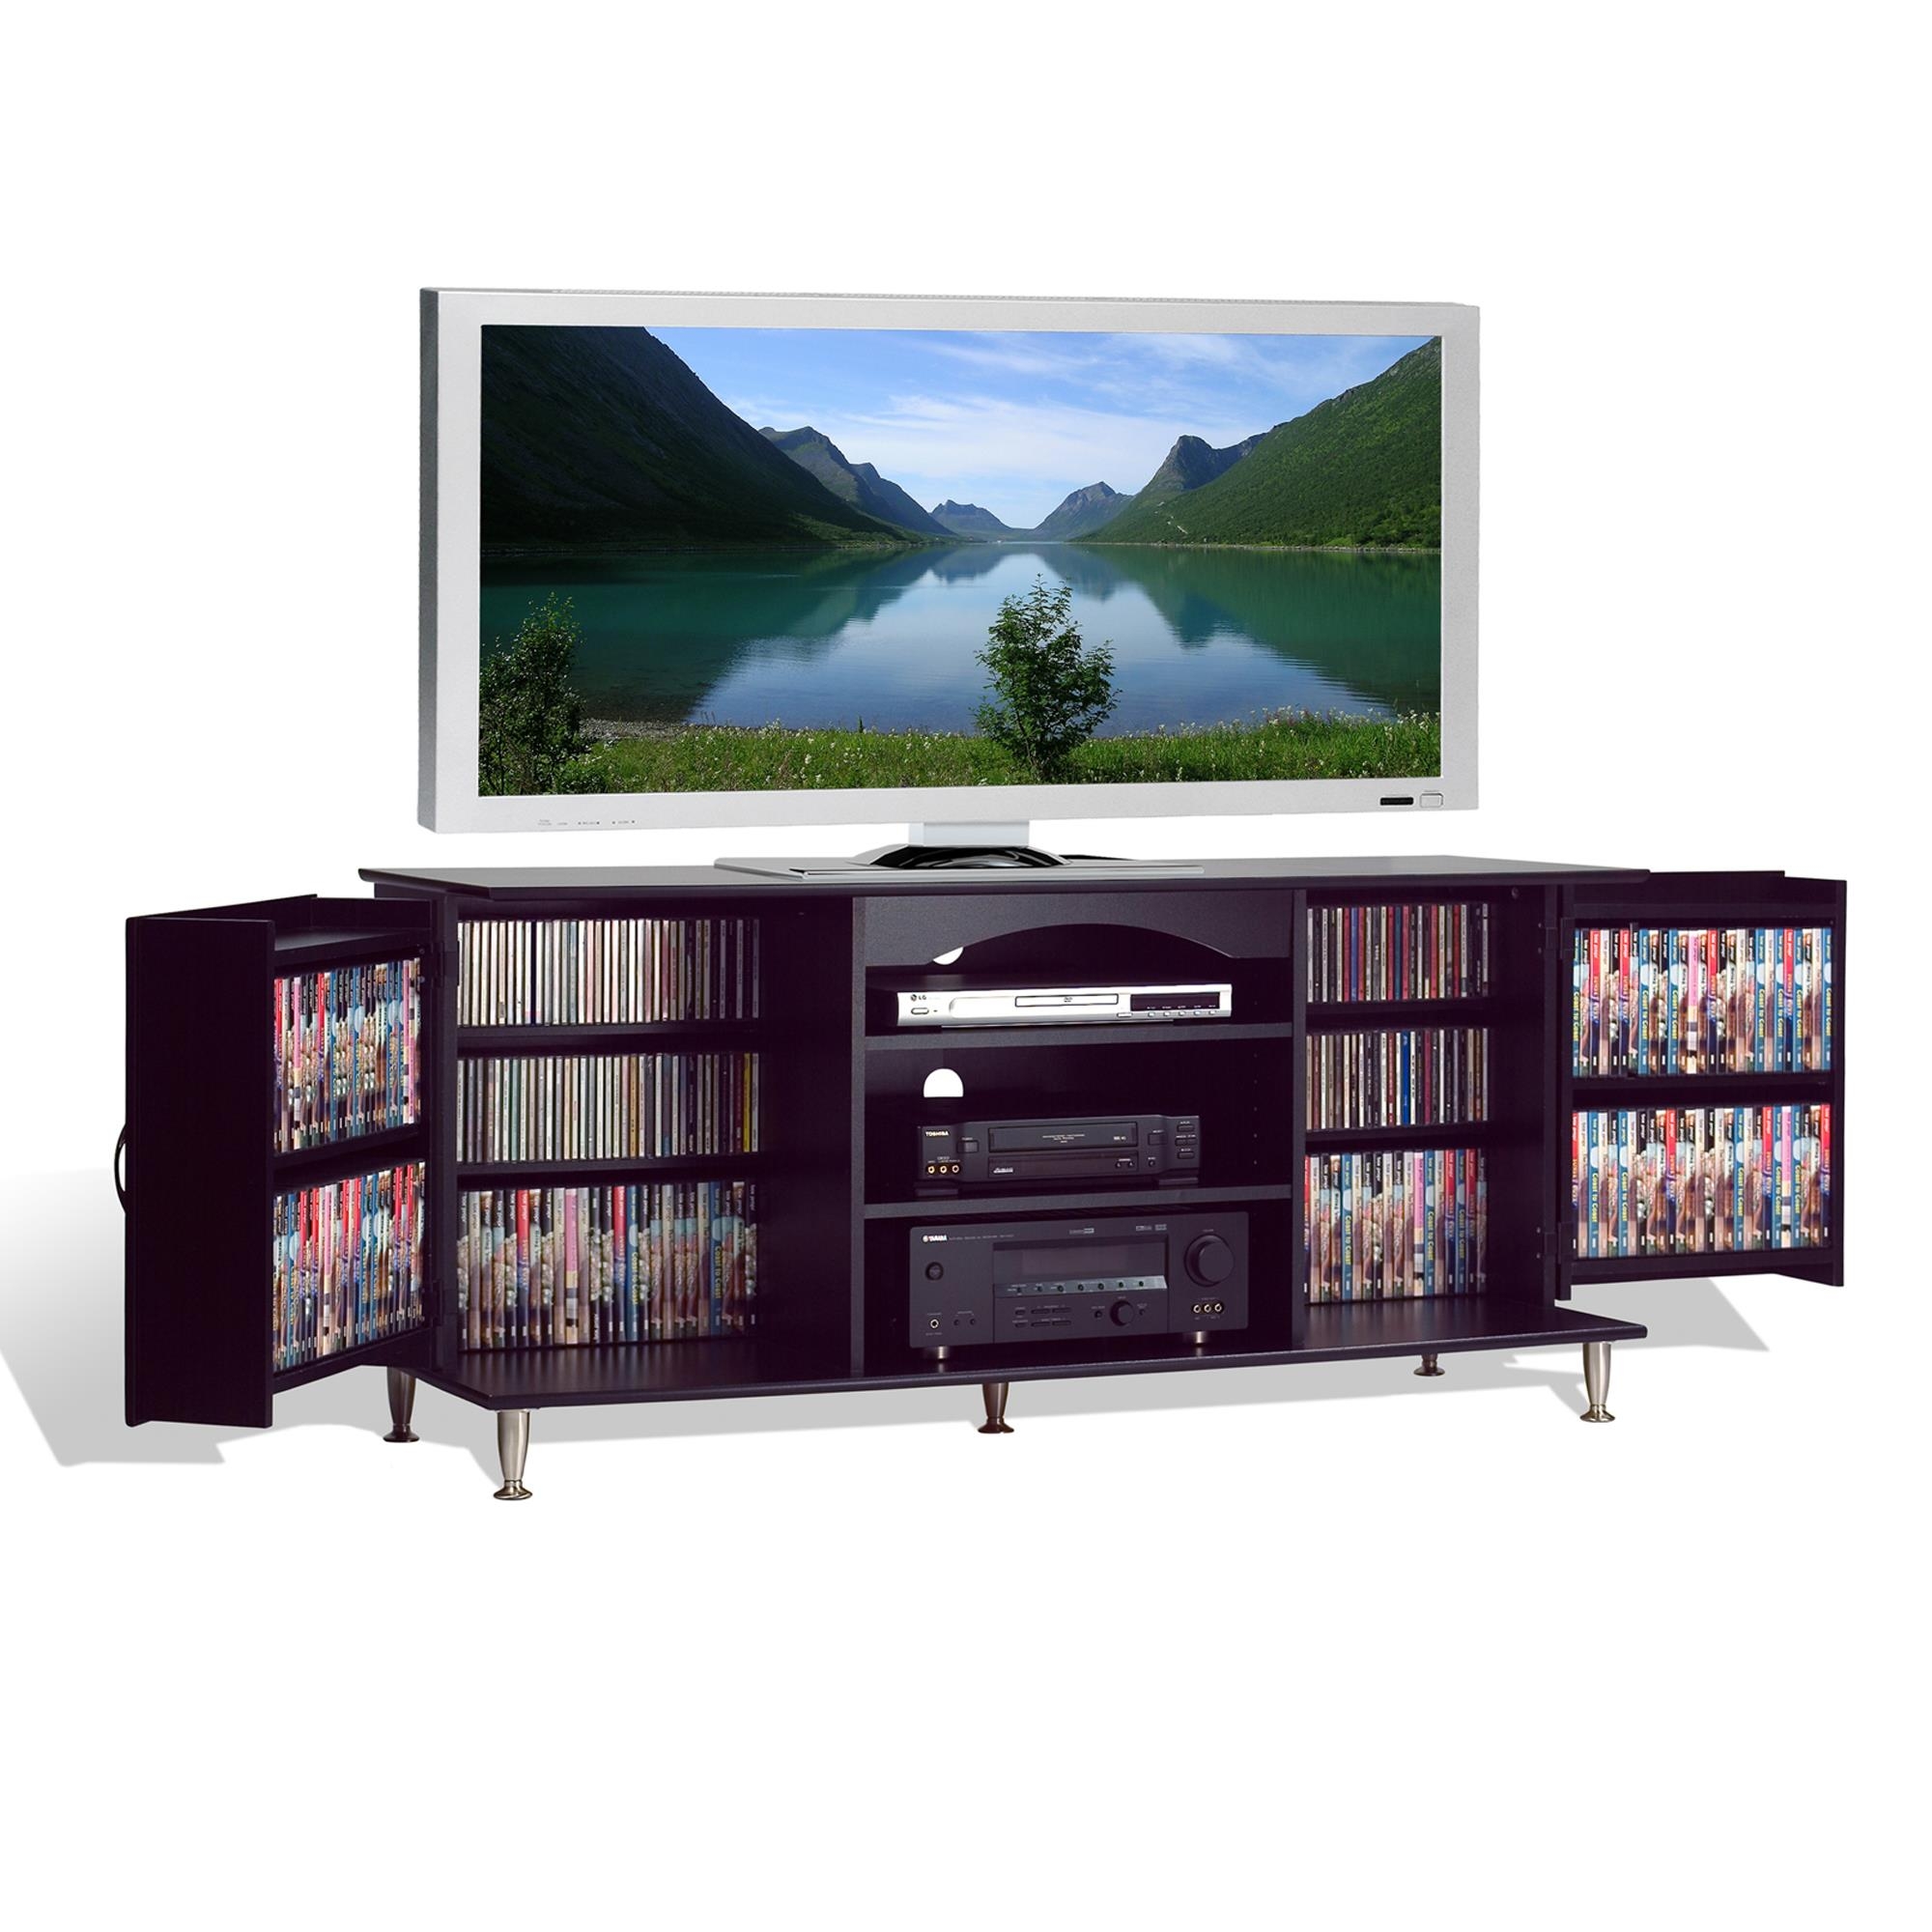 Dvd storage ideas use modern furniture and stylist shelves for